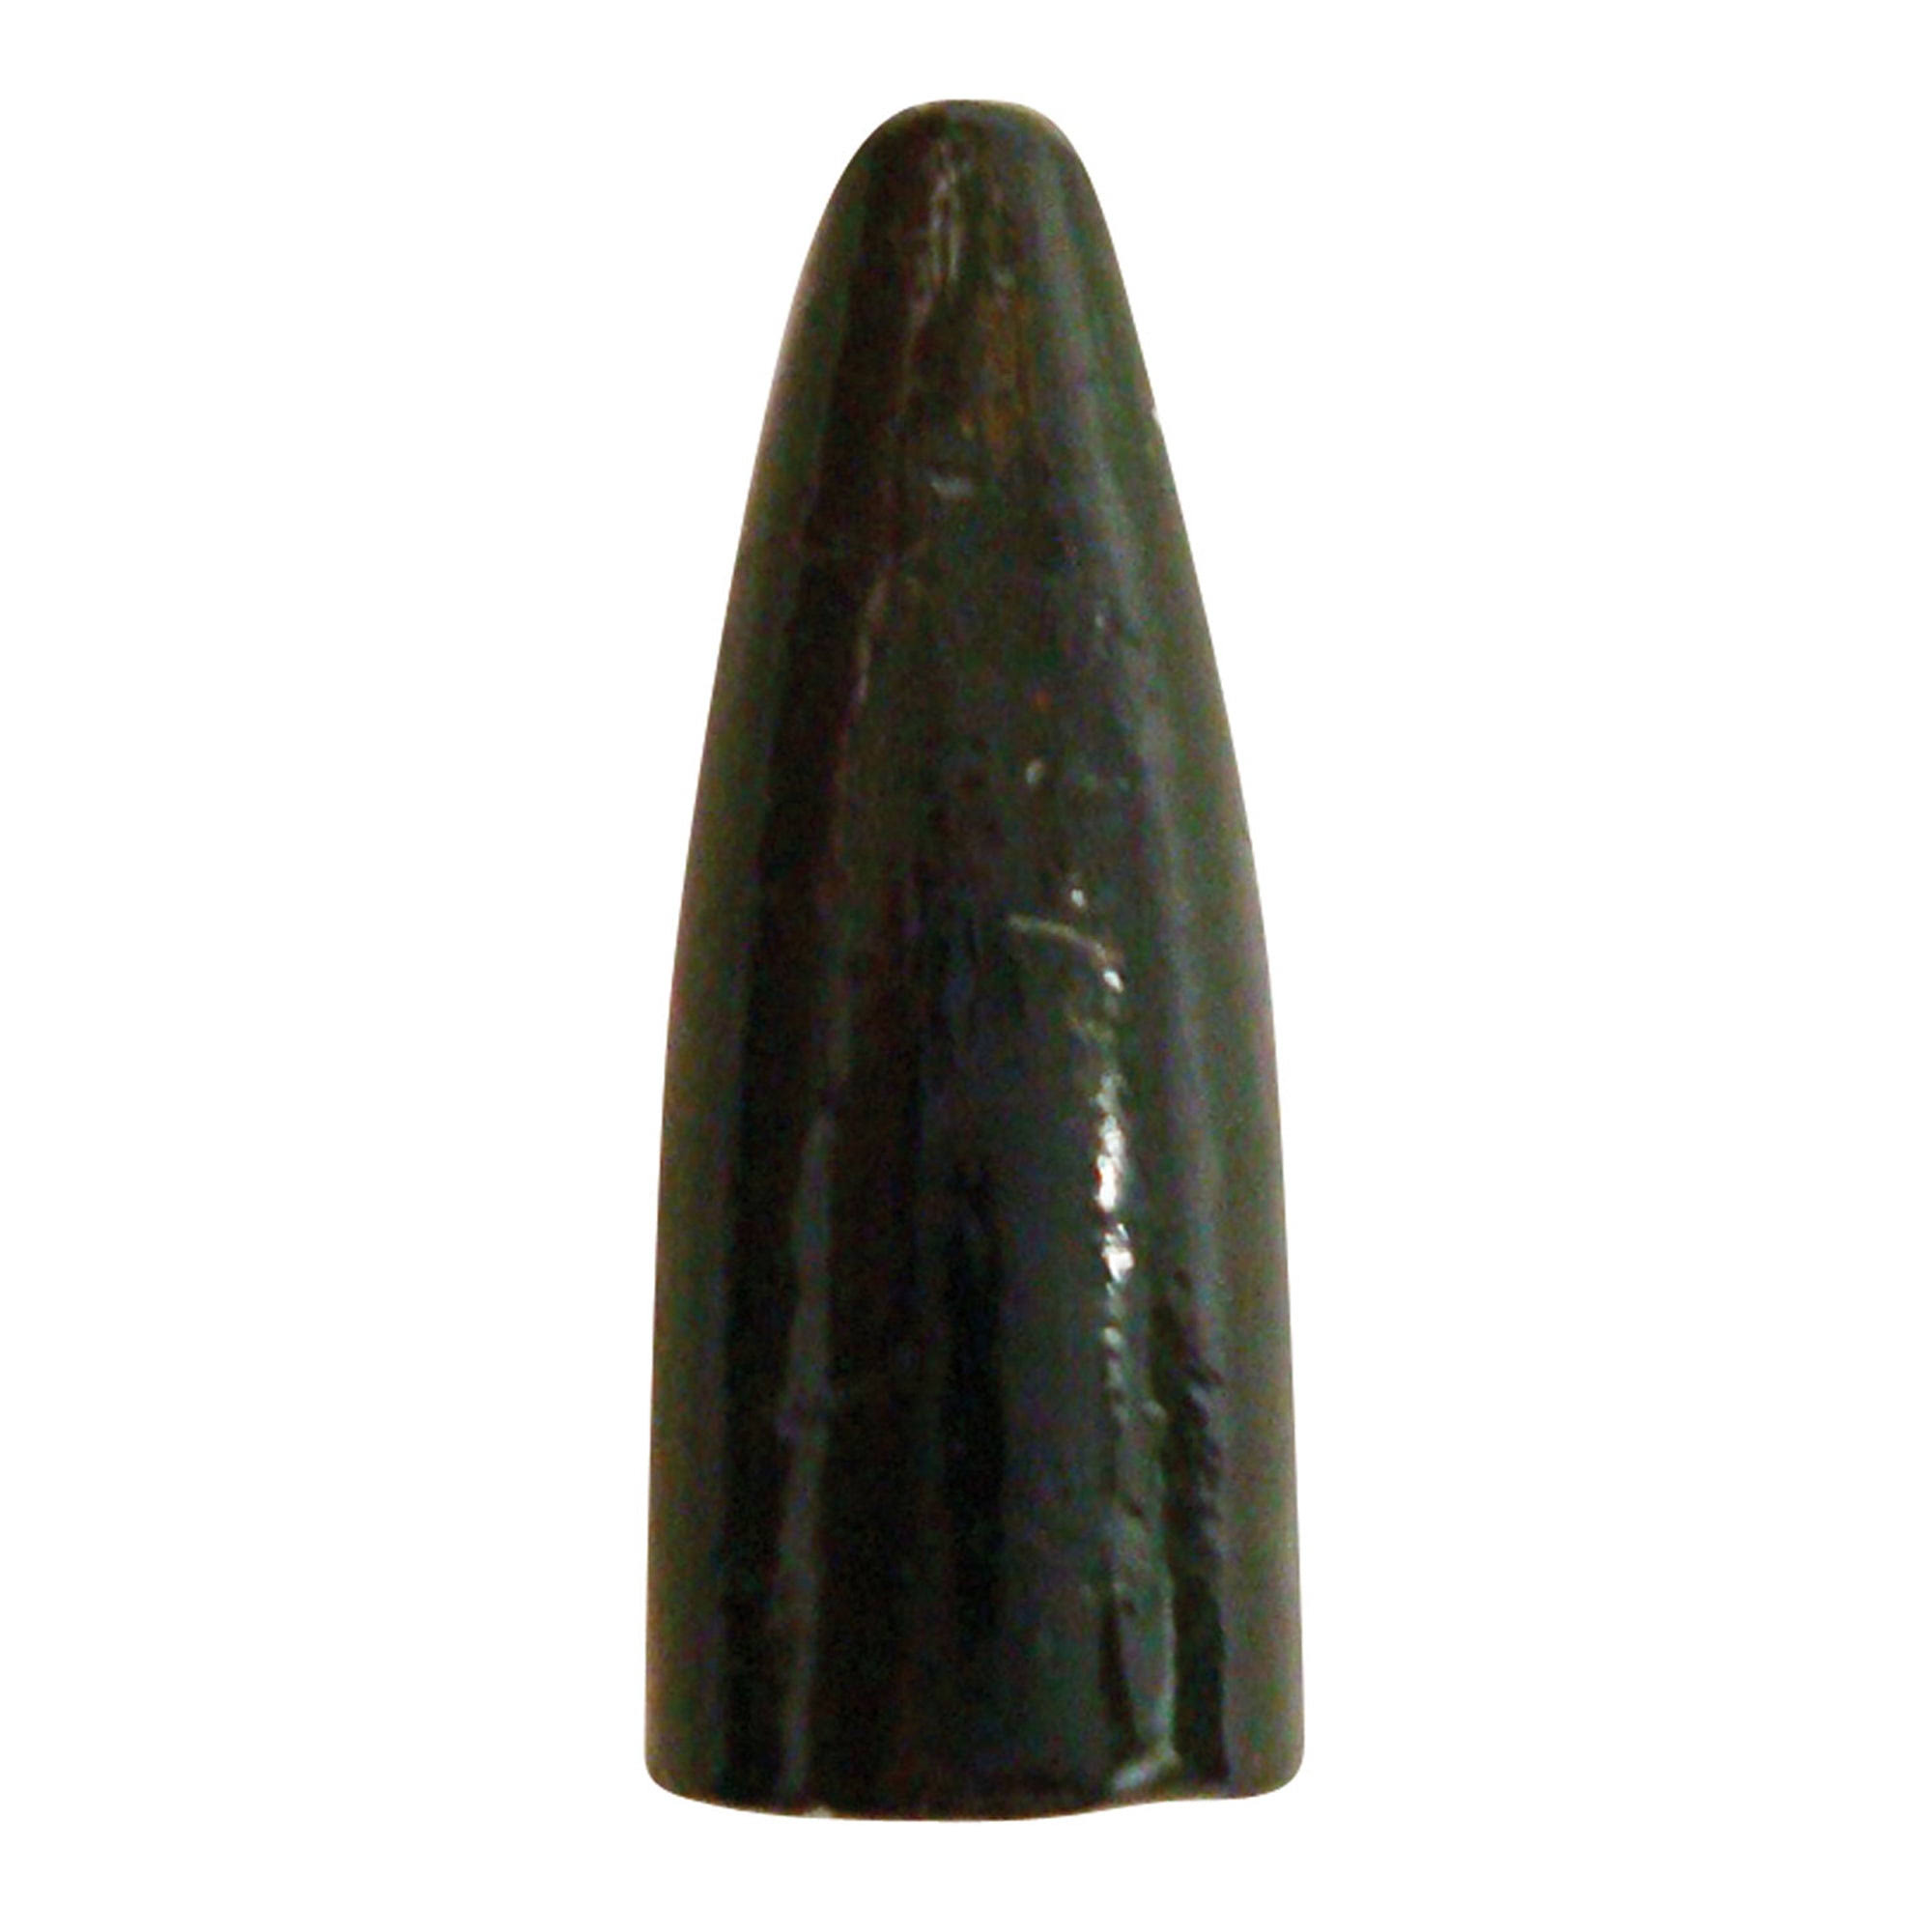 Bullet Weight Worm Weights - Black Lead, 1/4oz